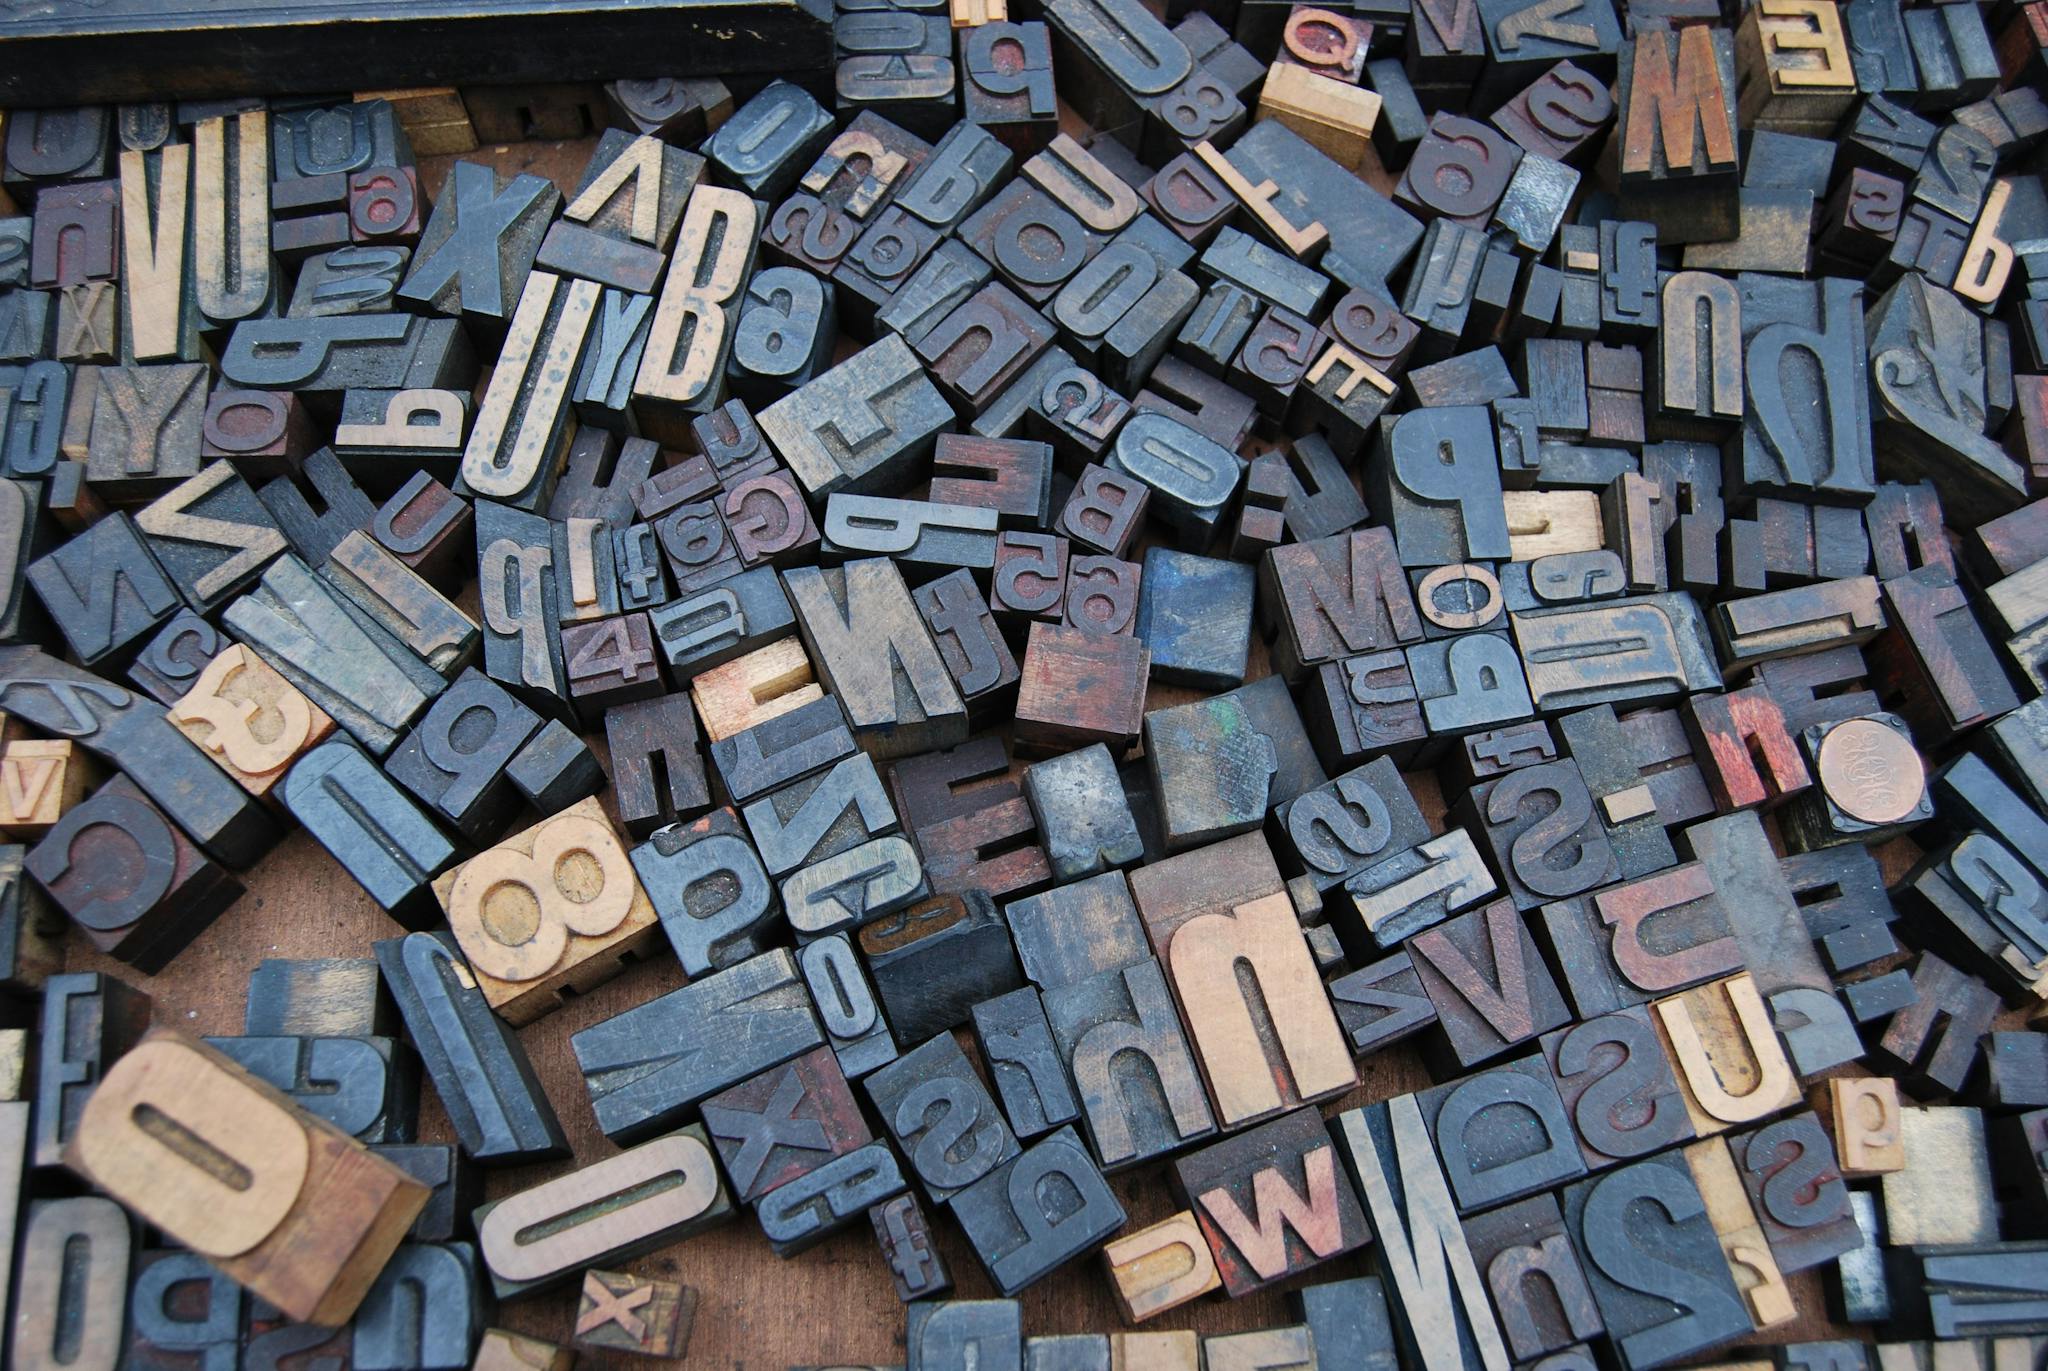 A photograph of printing press letter blocks